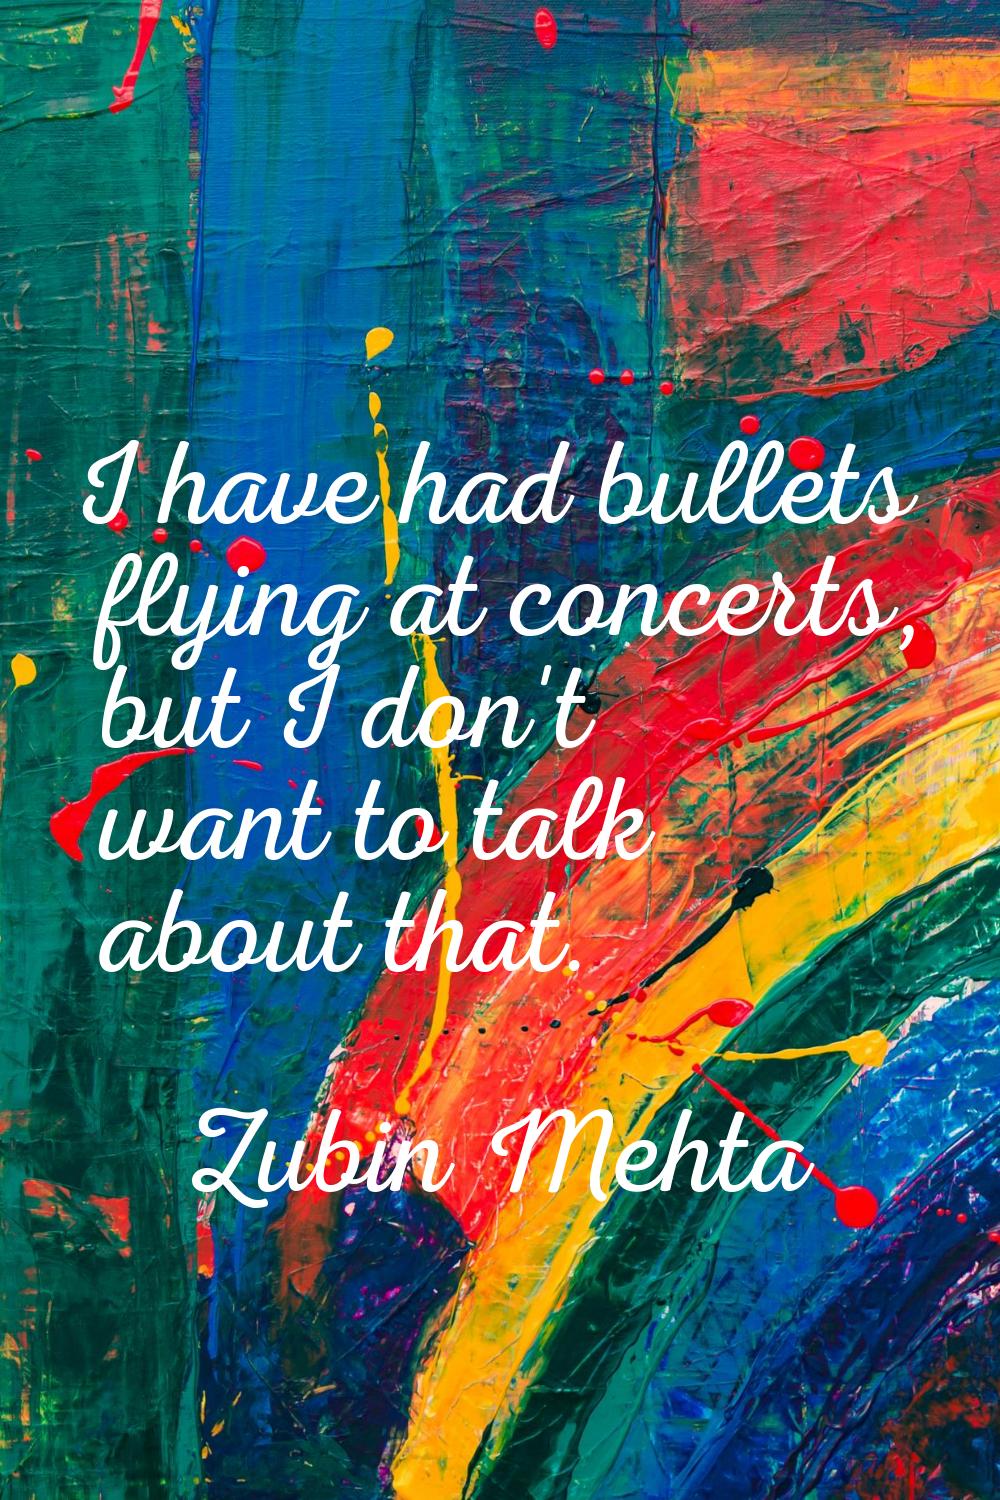 I have had bullets flying at concerts, but I don't want to talk about that.